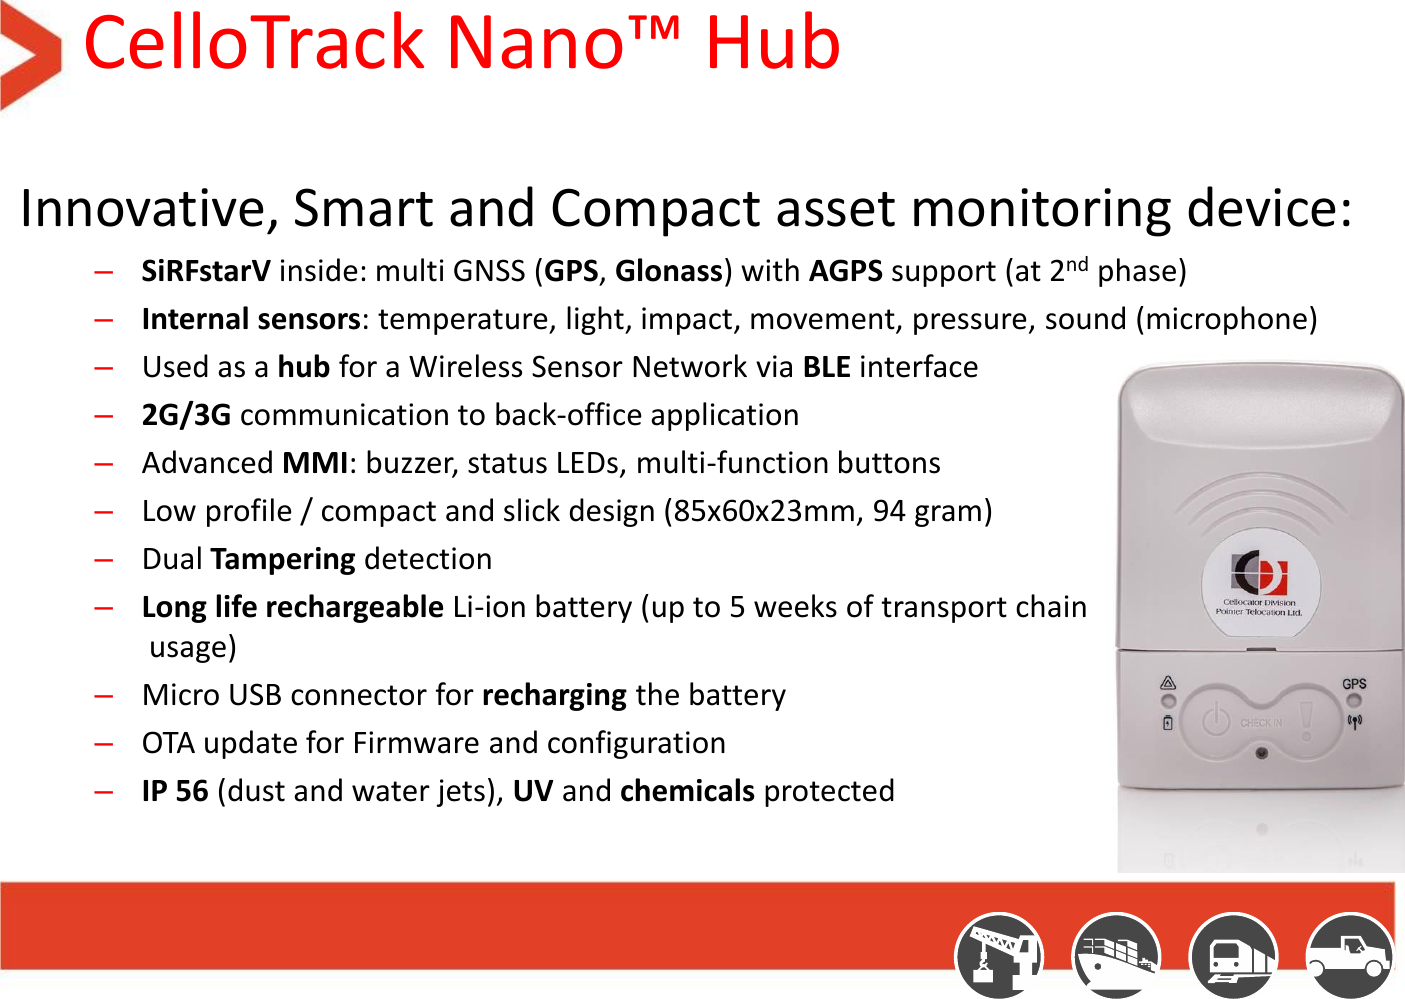 CelloTrack Nano™ Hub Innovative, Smart and Compact asset monitoring device: –SiRFstarV inside: multi GNSS (GPS, Glonass) with AGPS support (at 2nd phase) –Internal sensors: temperature, light, impact, movement, pressure, sound (microphone) –Used as a hub for a Wireless Sensor Network via BLE interface –2G/3G communication to back-office application –Advanced MMI: buzzer, status LEDs, multi-function buttons –Low profile / compact and slick design (85x60x23mm, 94 gram)  –Dual Tampering detection –Long life rechargeable Li-ion battery (up to 5 weeks of transport chain  usage) –Micro USB connector for recharging the battery –OTA update for Firmware and configuration –IP 56 (dust and water jets), UV and chemicals protected 